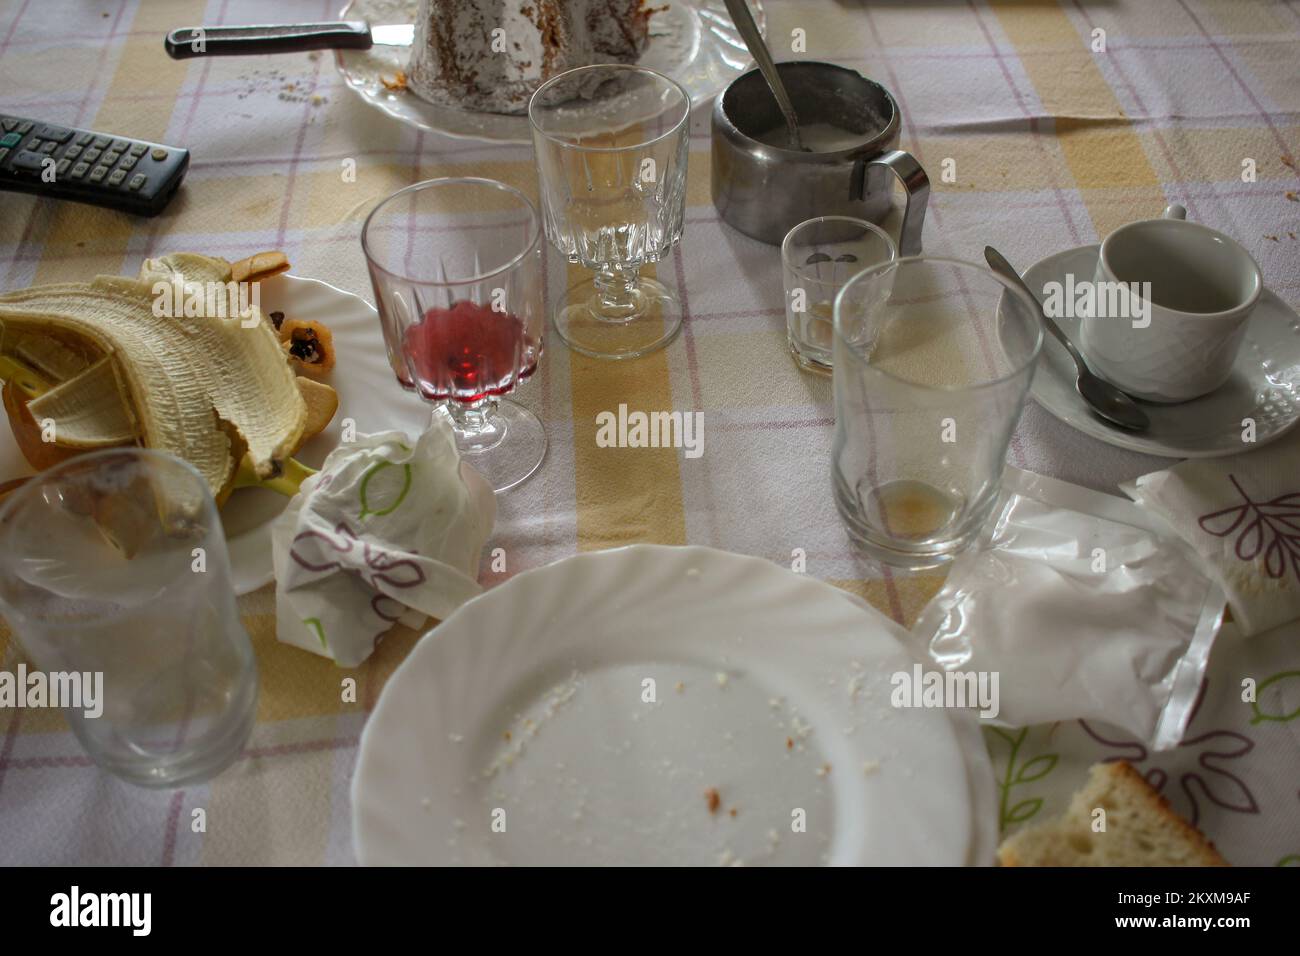 table is a mess after having lunch and having coffee Stock Photo